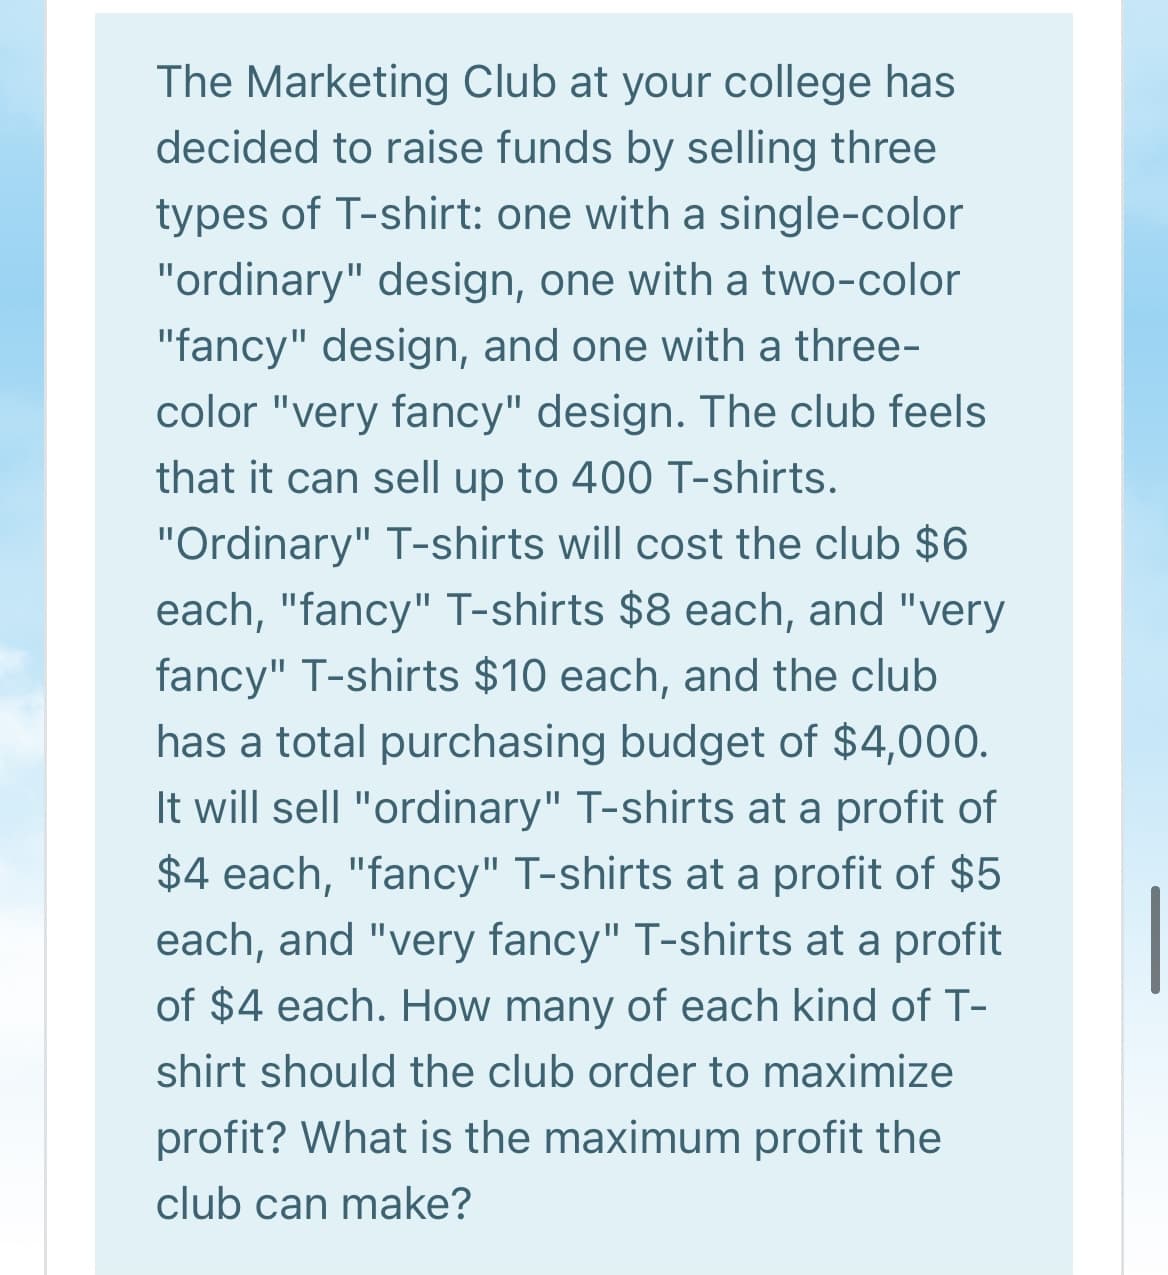 The Marketing Club at your college has
decided to raise funds by selling three
types of T-shirt: one with a single-color
"ordinary" design, one with a two-color
"fancy" design, and one with a three-
color "very fancy" design. The club feels
that it can sell up to 400 T-shirts.
"Ordinary" T-shirts will cost the club $6
each, "fancy" T-shirts $8 each, and "very
fancy" T-shirts $10 each, and the club
has a total purchasing budget of $4,000.
It will sell "ordinary" T-shirts at a profit of
$4 each, "fancy" T-shirts at a profit of $5
each, and "very fancy" T-shirts at a profit
of $4 each. How many of each kind of T-
shirt should the club order to maximize
profit? What is the maximum profit the
club can make?
